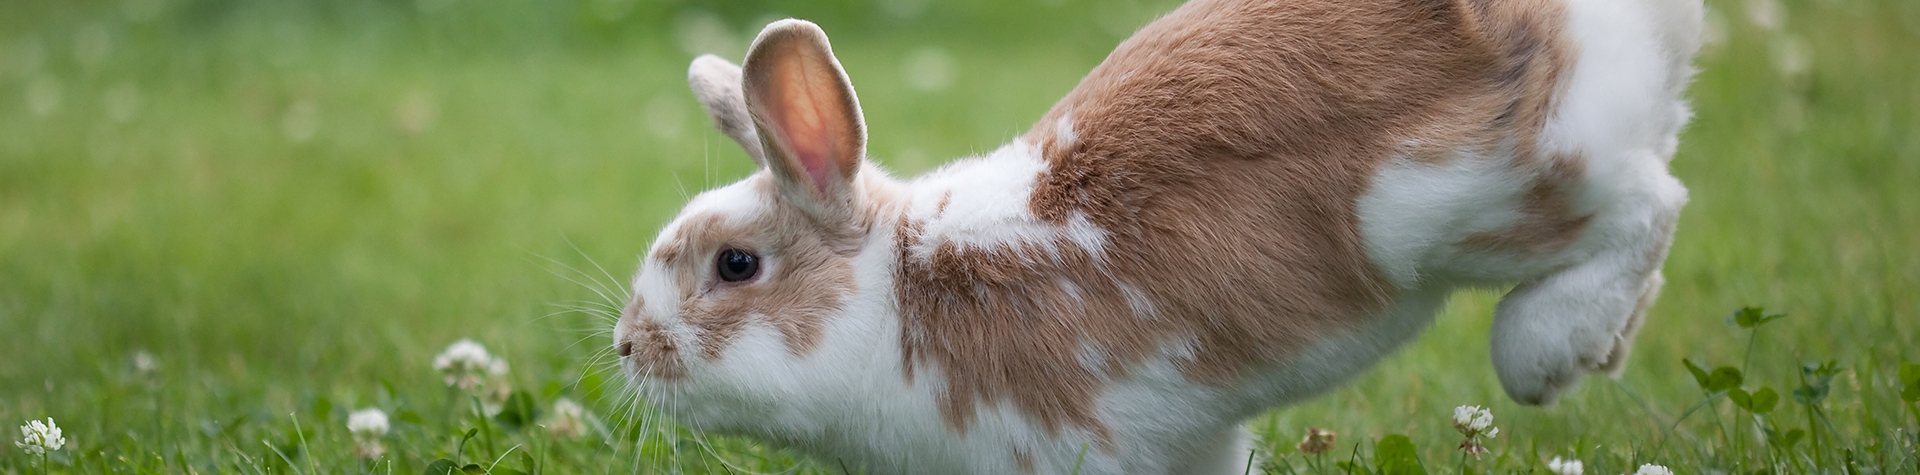 Pet Health for Life Plan for Rabbits